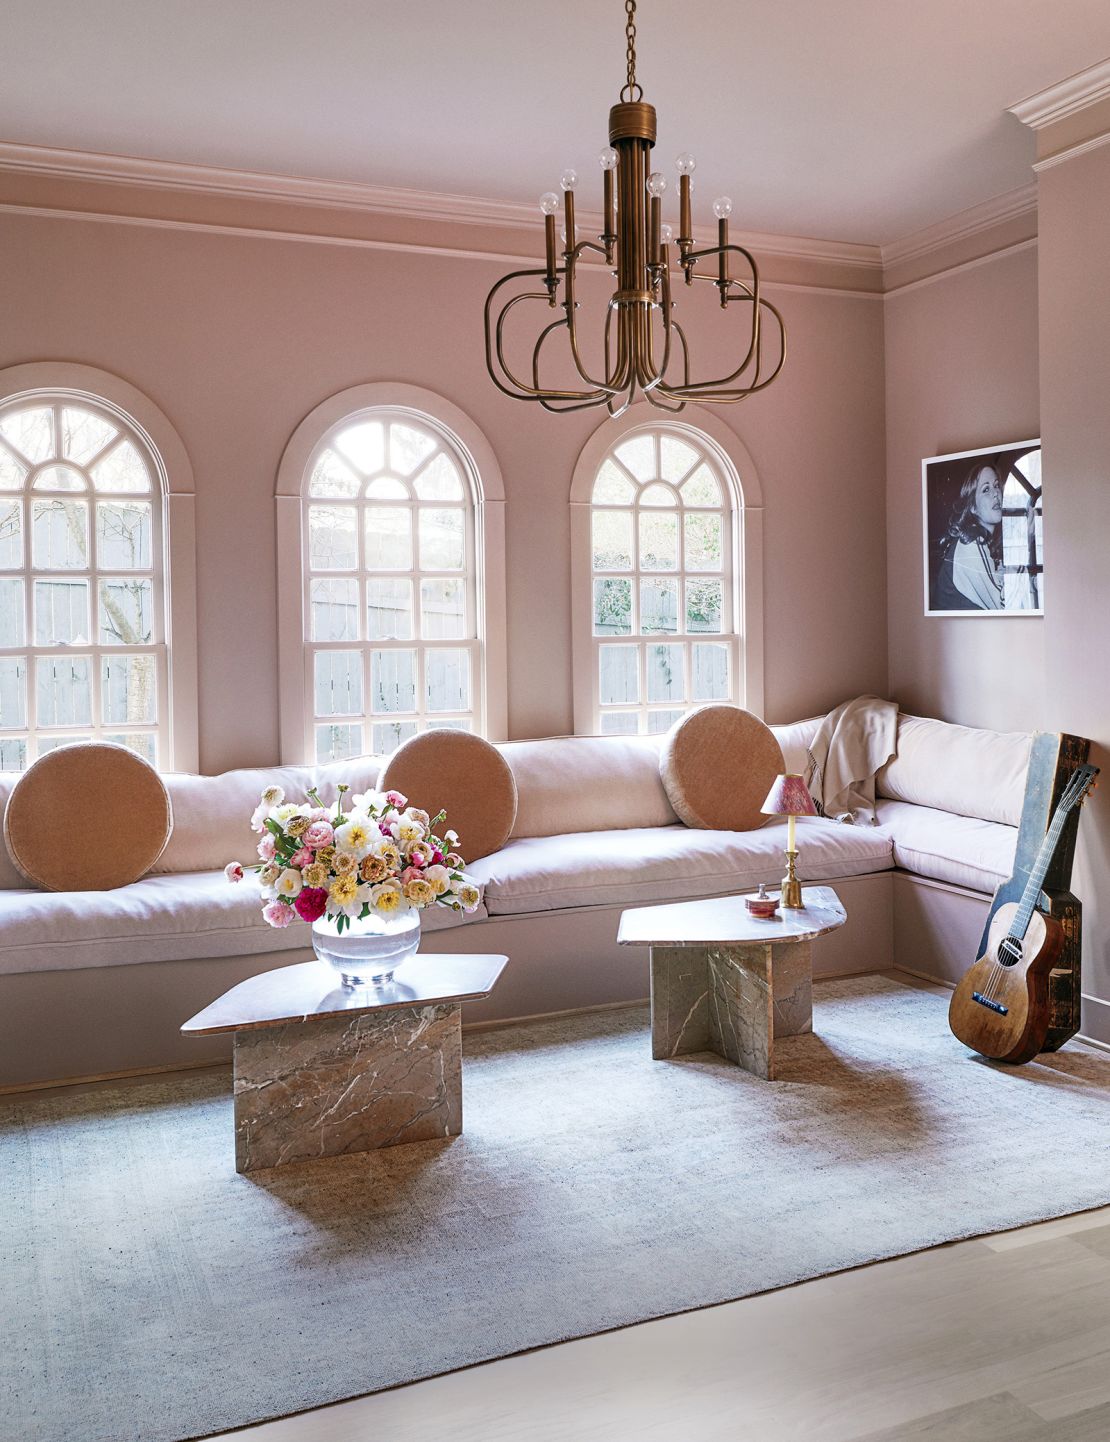 Kacey Musgraves' home, as featured in the May isssue of Architectural Digest.